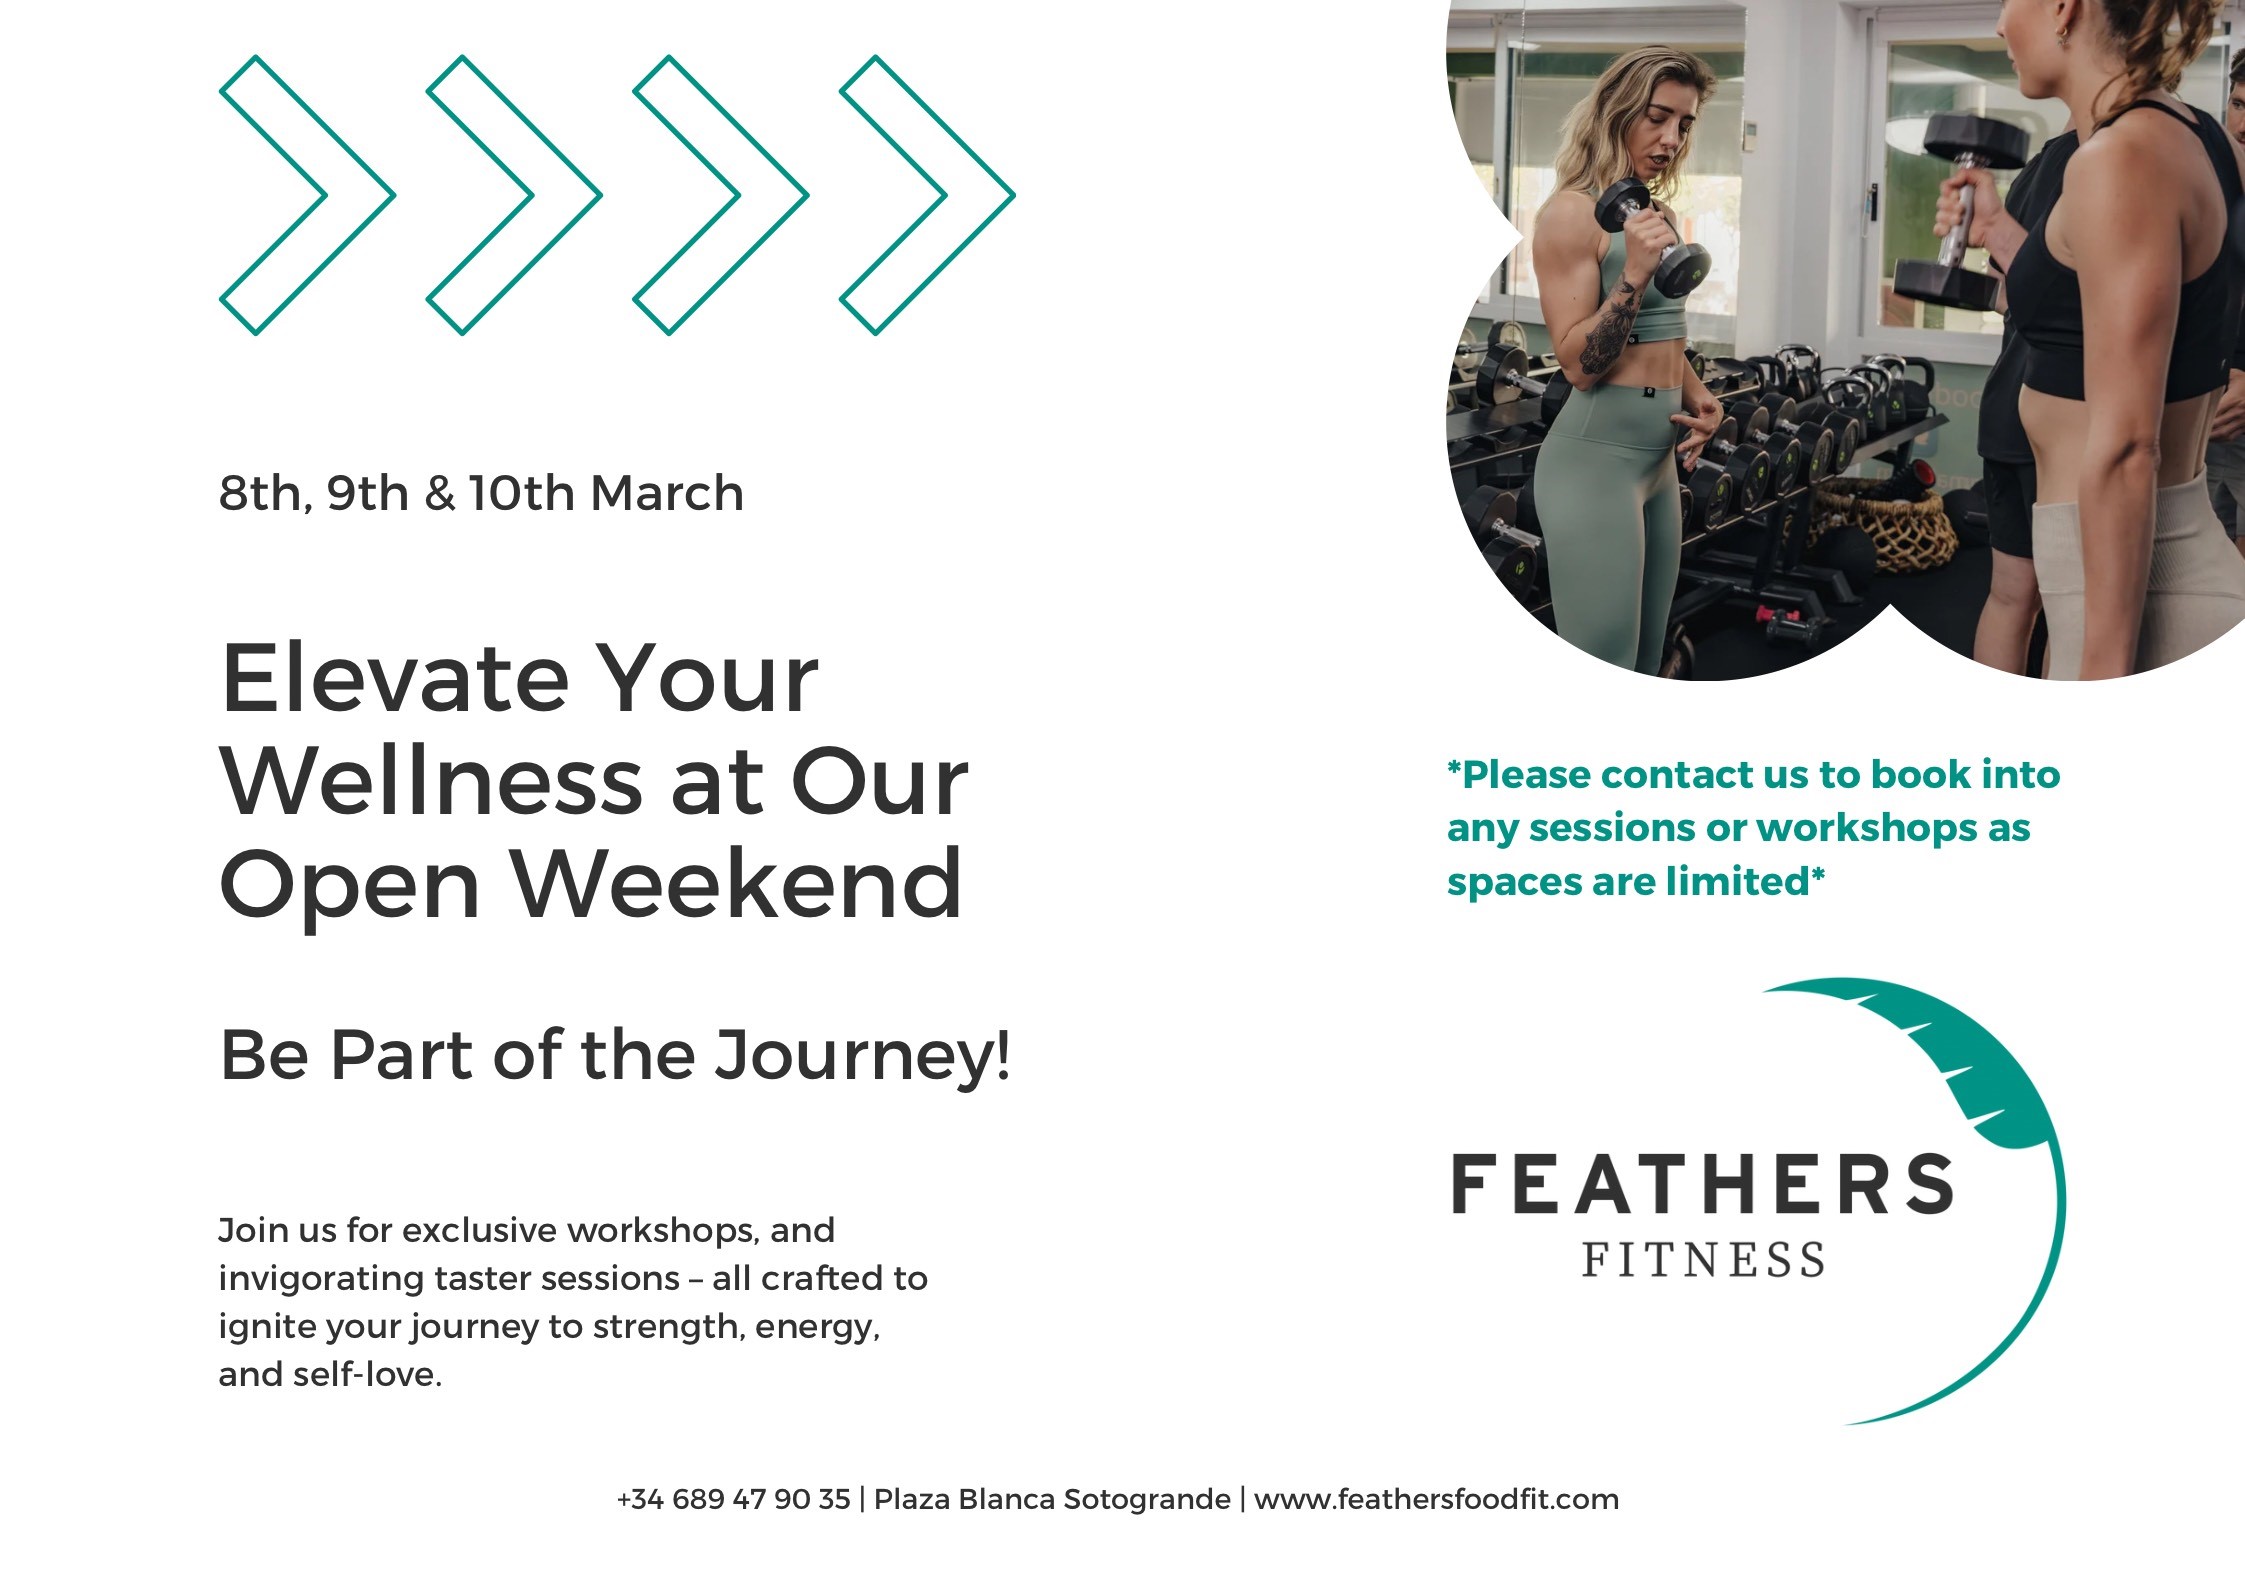 Charity Open Weekend marks opening of Feathers Fitness Studio in Plaza Blanca